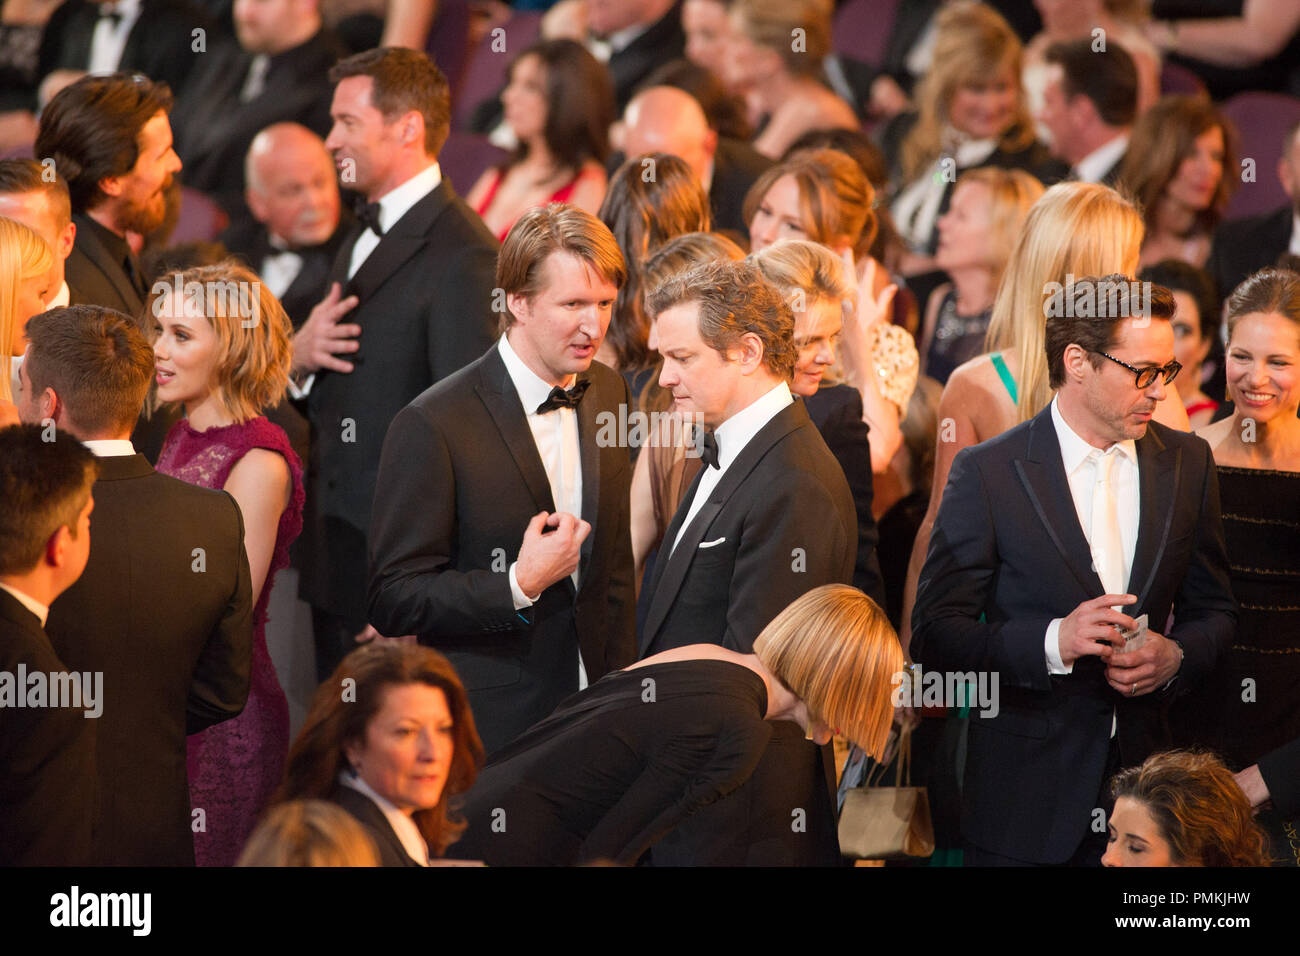 Tom Hooper, Oscar-nominee for Achievement in Directing, and Colin Firth, Oscar-nominee for Performance by an Actor in a Leading Role, at the 83rd Annual Academy Awards at the Kodak Theatre in Hollywood, CA February 27, 2011.  File Reference # 30871 377  For Editorial Use Only -  All Rights Reserved Stock Photo